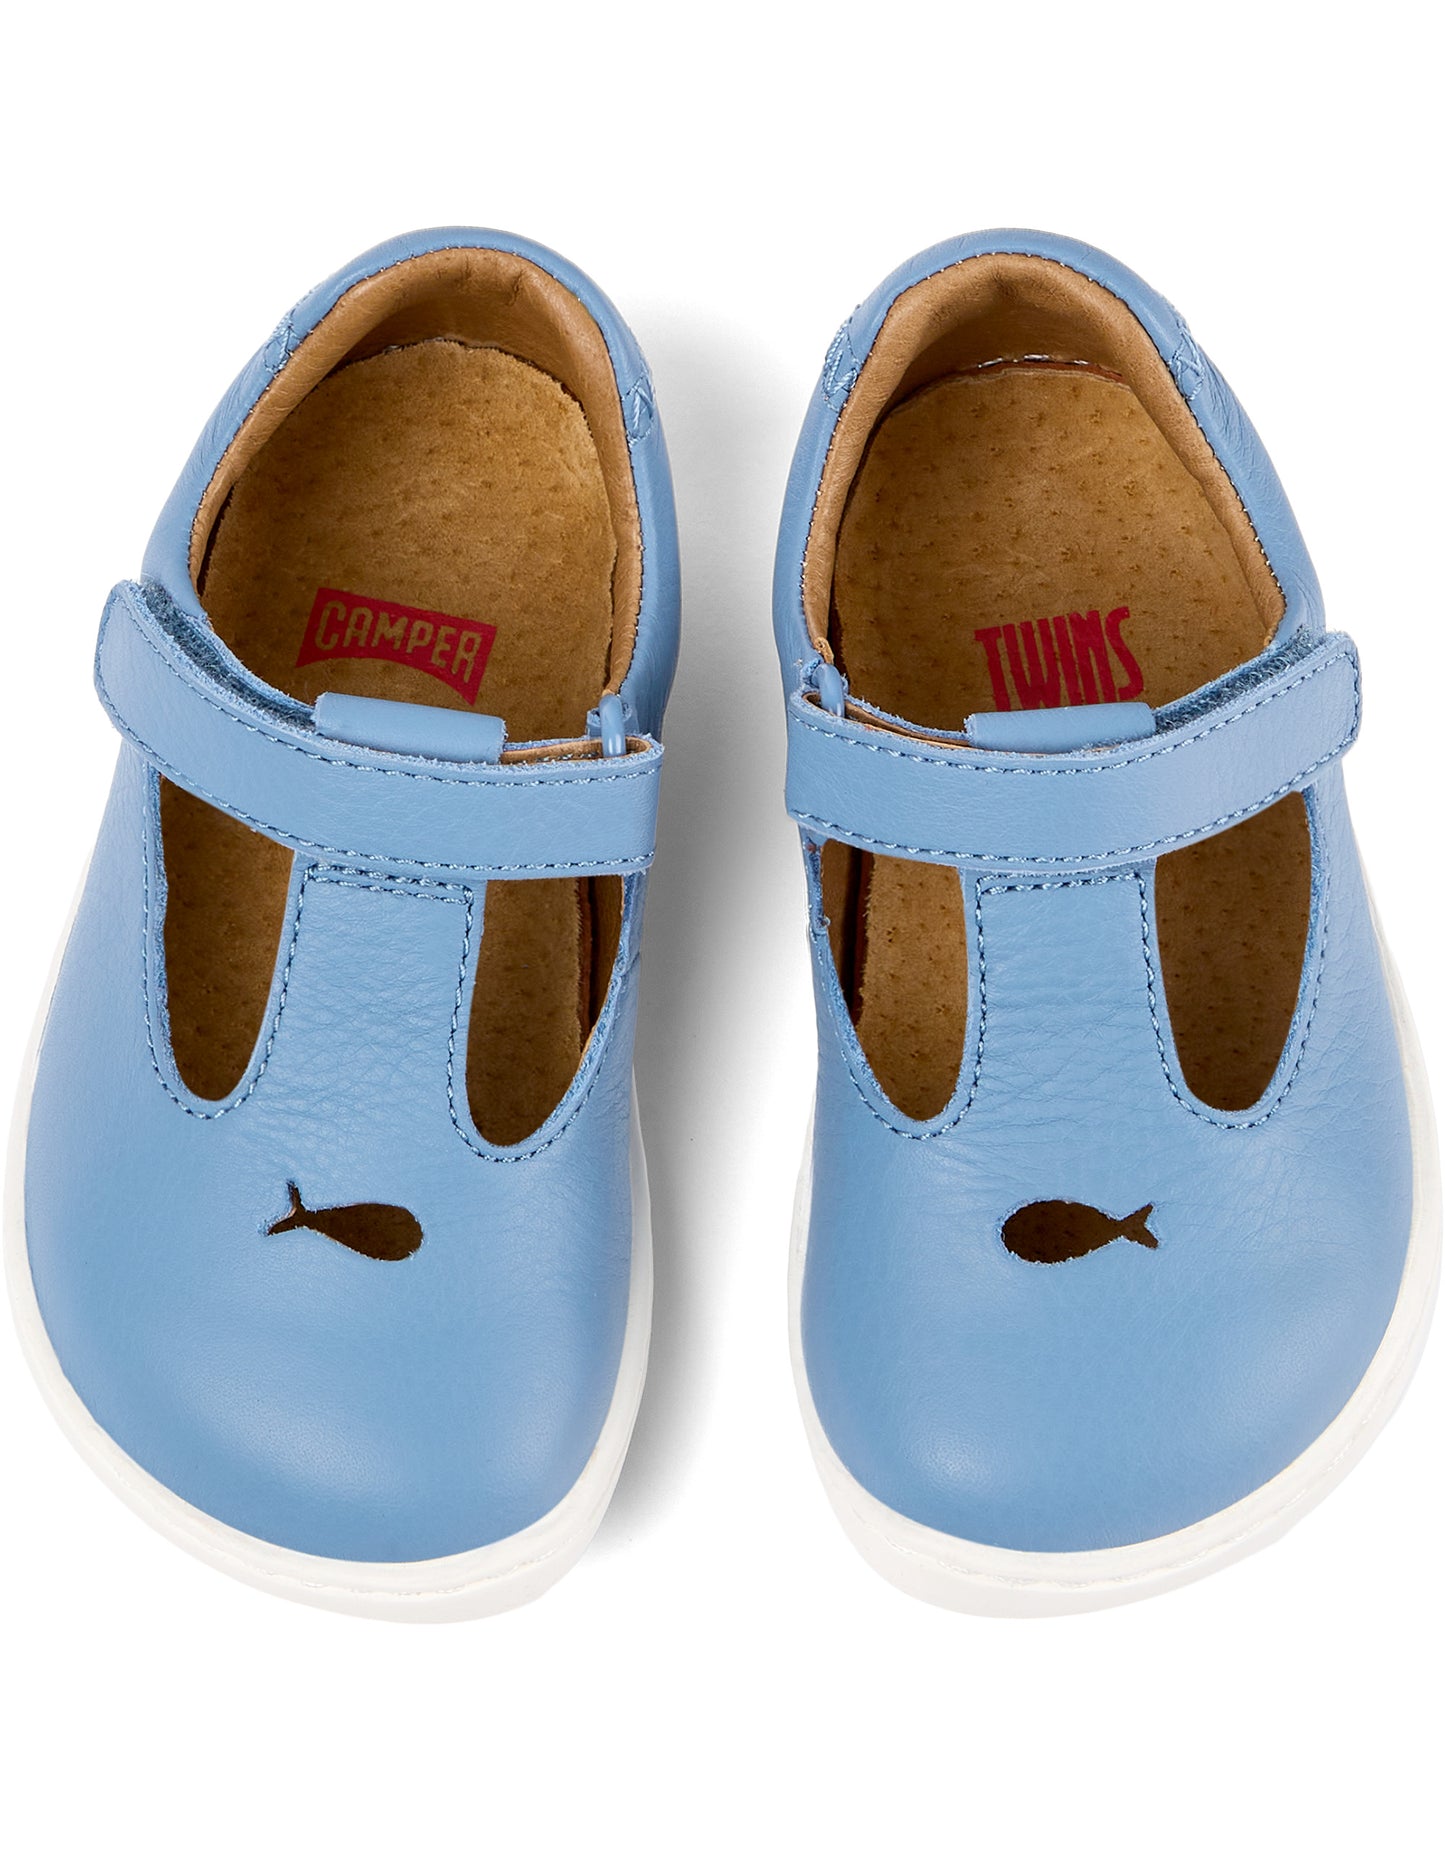 A T-bar shoe by Camper, style K800564-001, in blue with cut out fish detail. Velcro fastening. Above view of a pair.